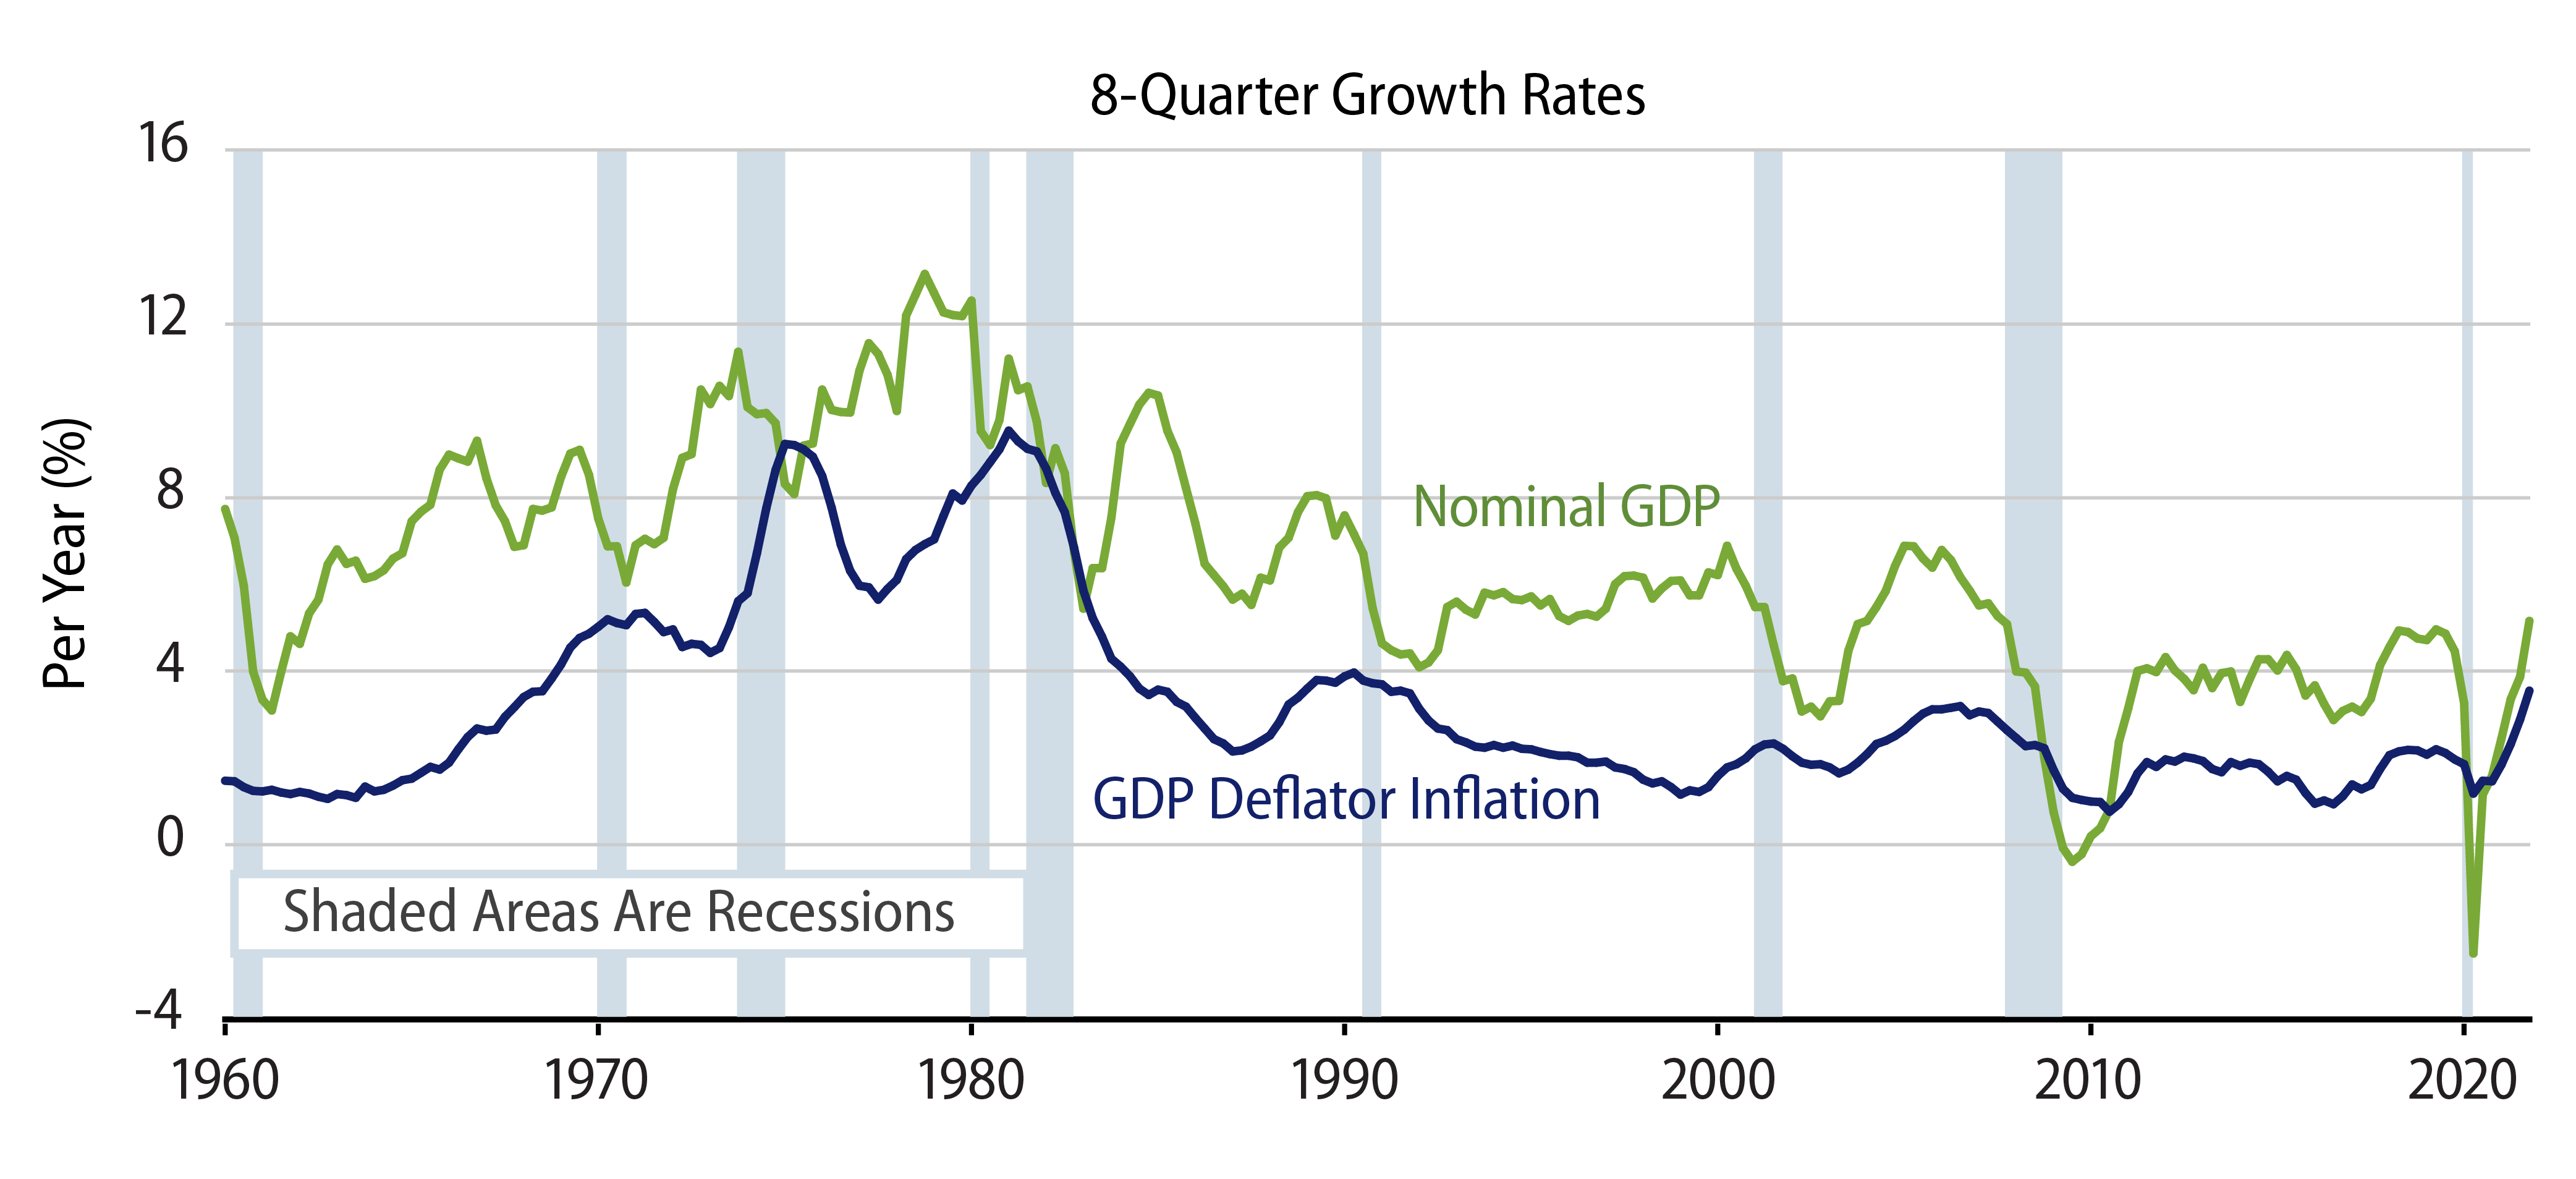 Nominal GDP Growth and Inflation